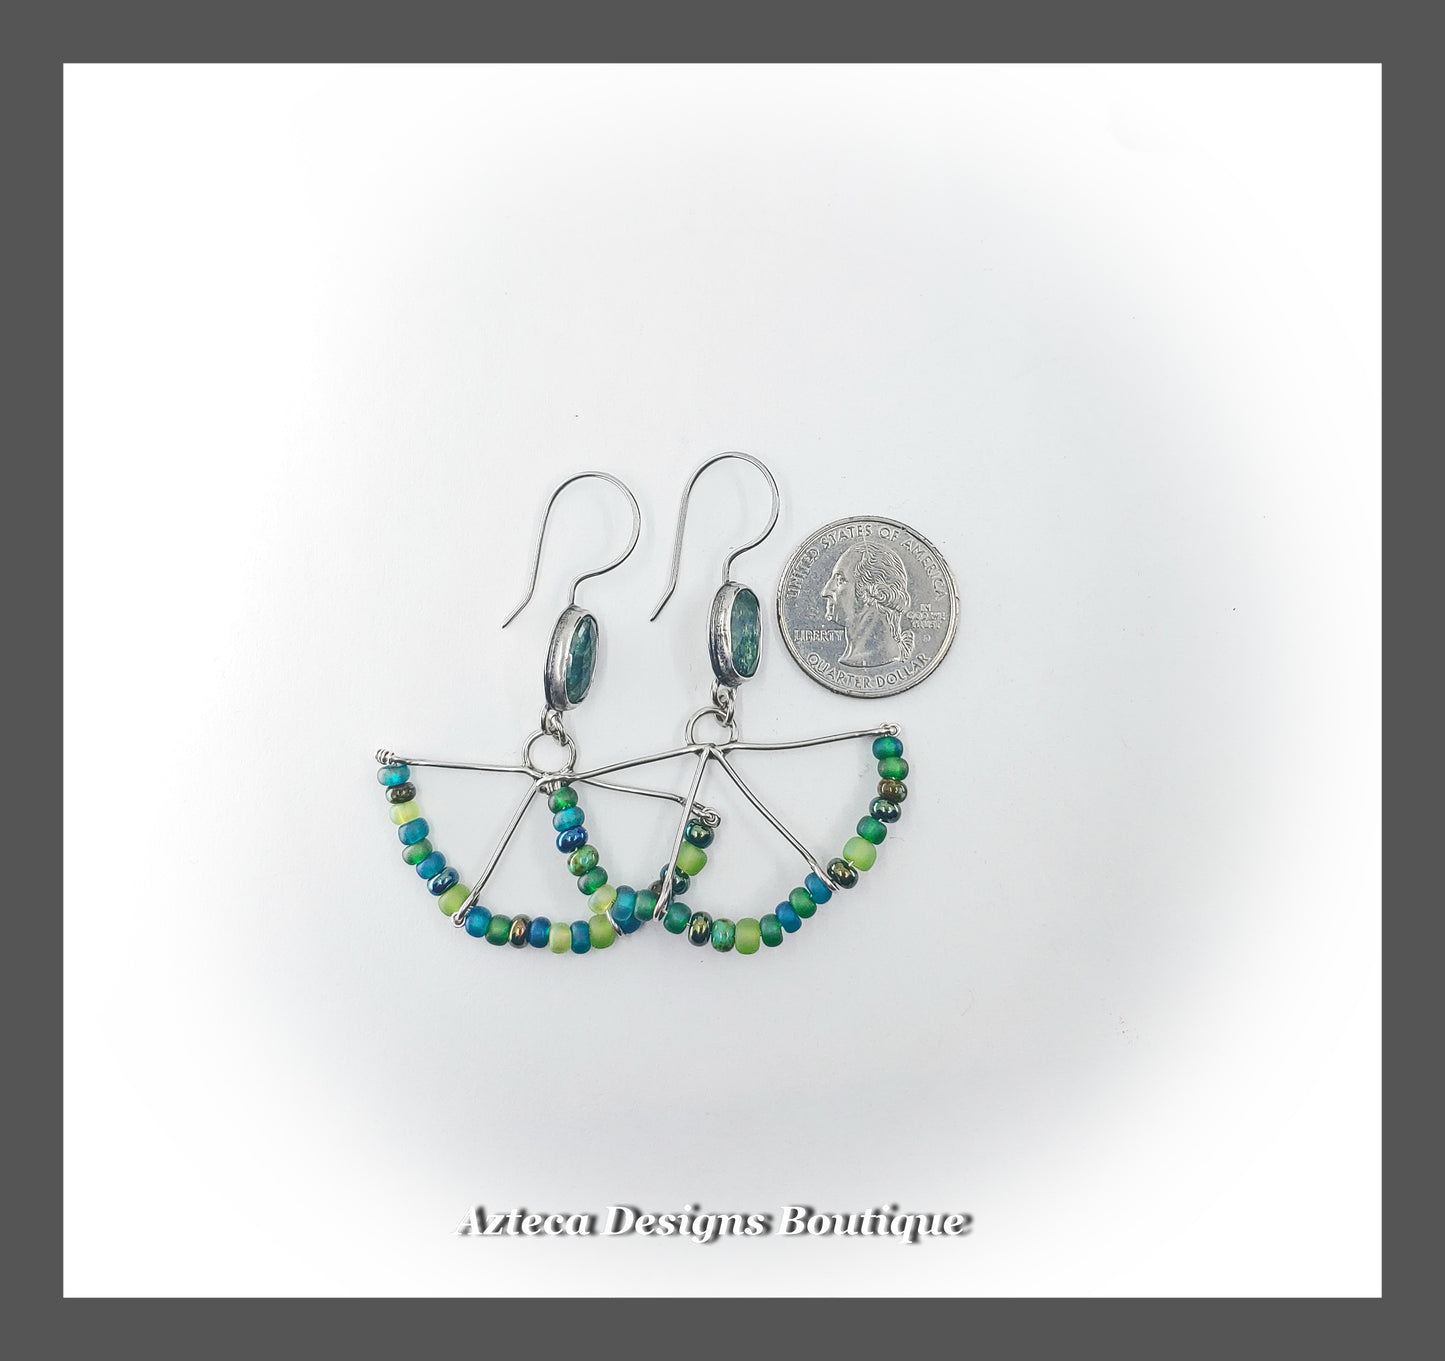 Mint Blue Bi Color Kyanite + Glass Seed Beads + Argentium Silver Hand Fabricated Earrings